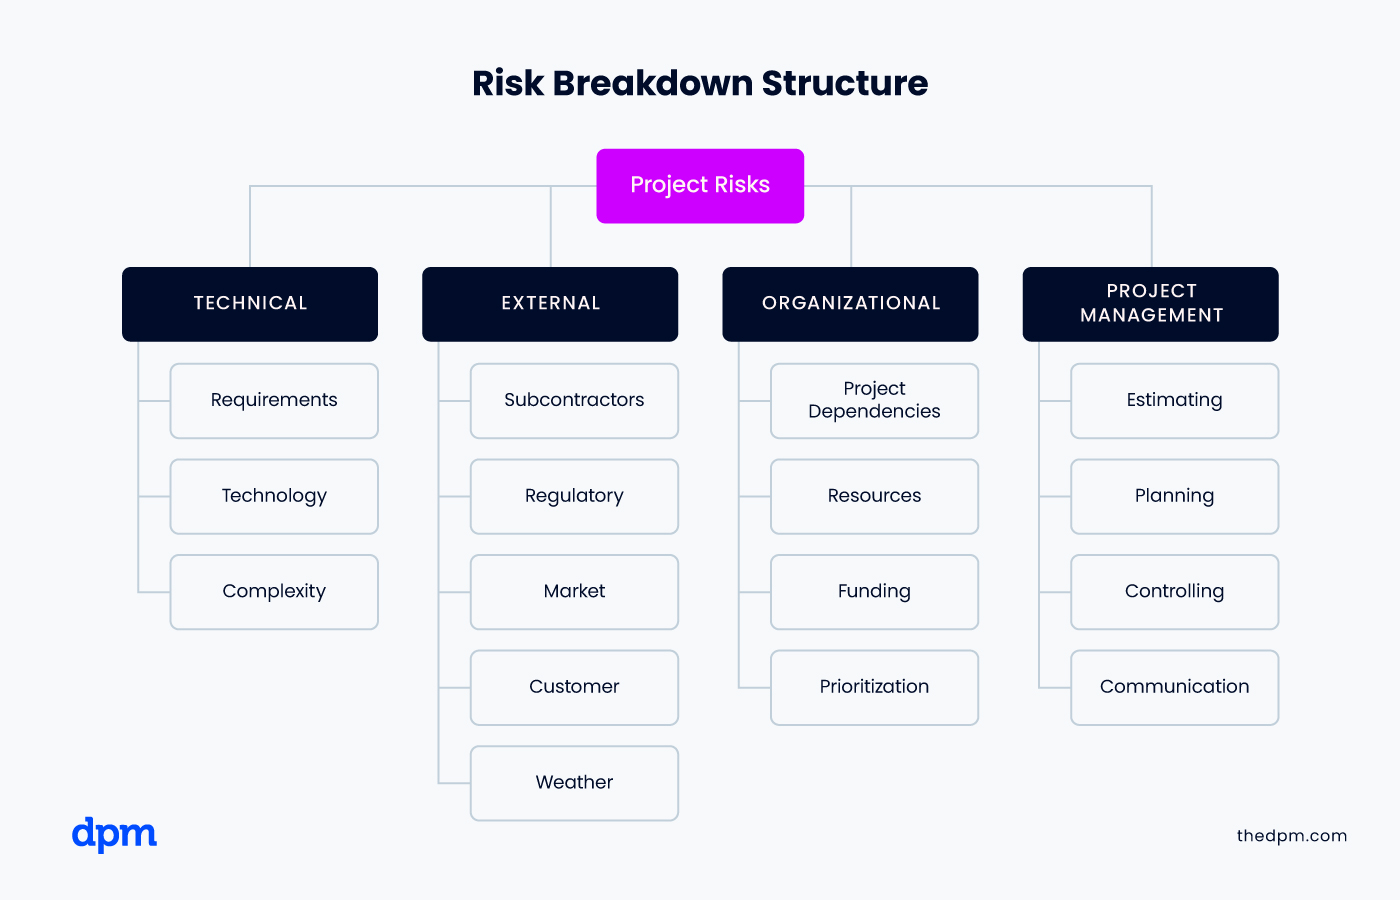 Example of a risk breakdown structure with risks organized into categories, such as Technical, External, Organizational, and Project Management, which are then broken into smaller subcategories.